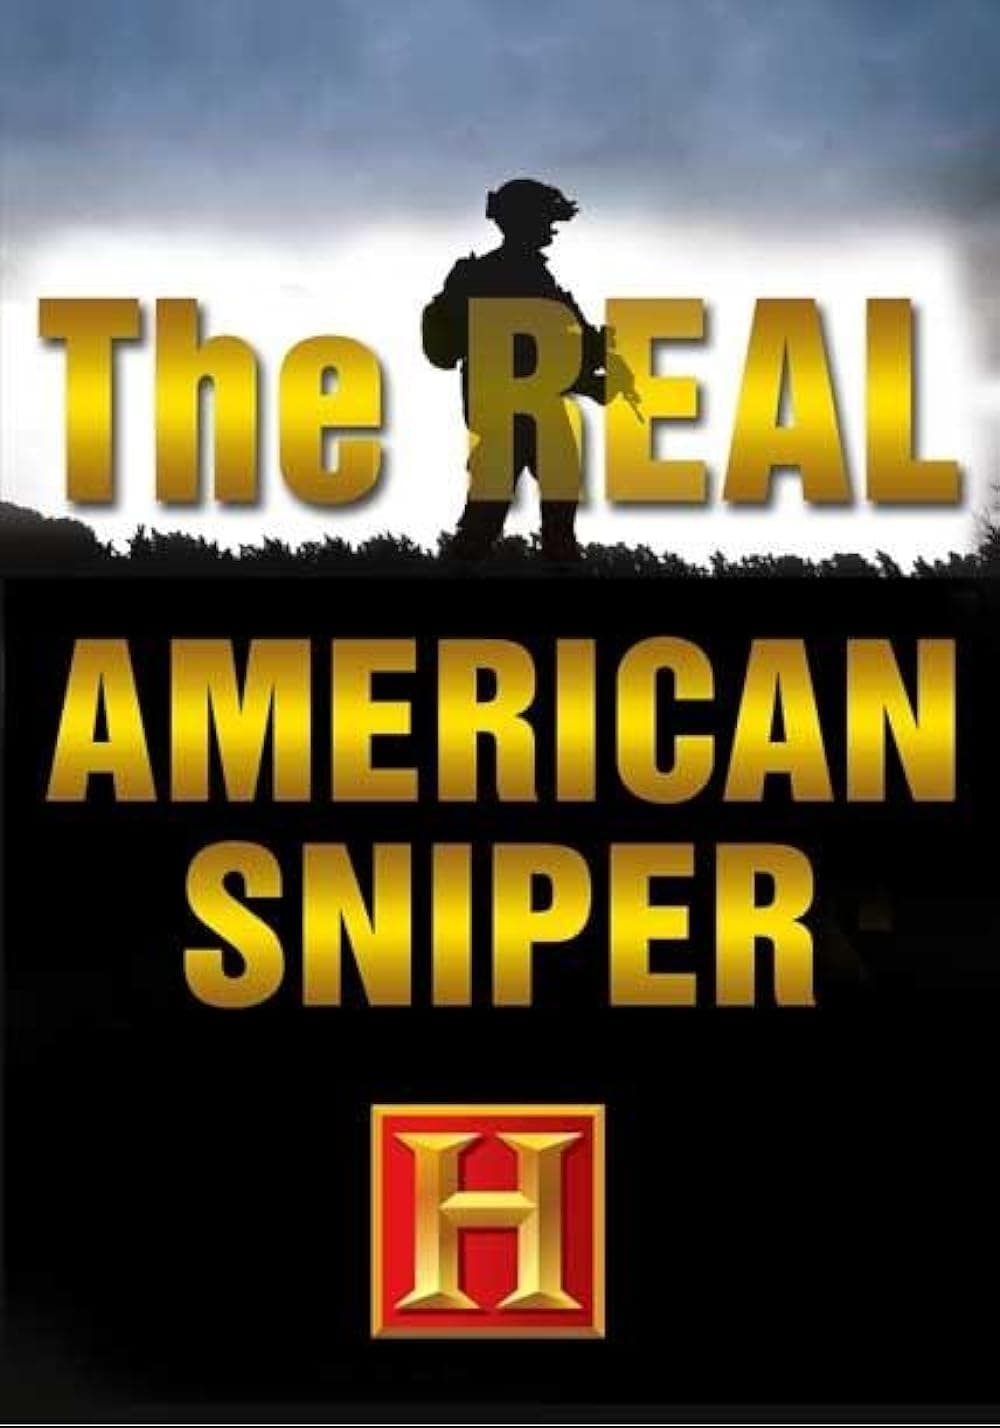 The Real American Sniper